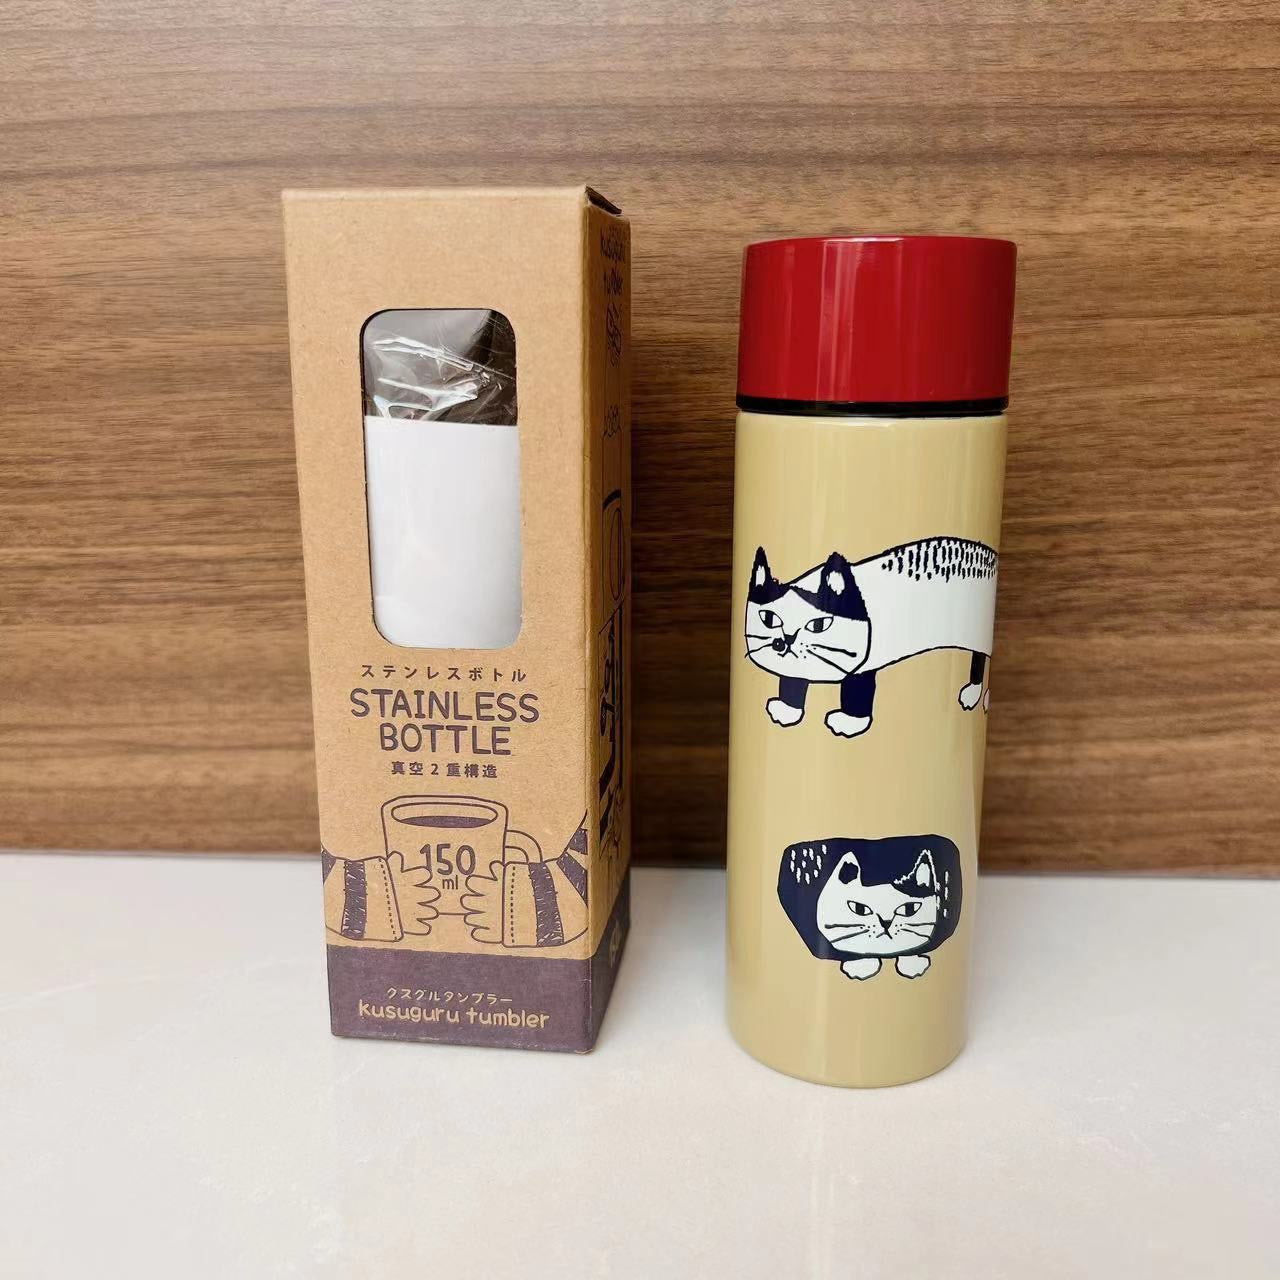 Cat & Dog Stainless Steel Thermal Coffee Flask - 150ml